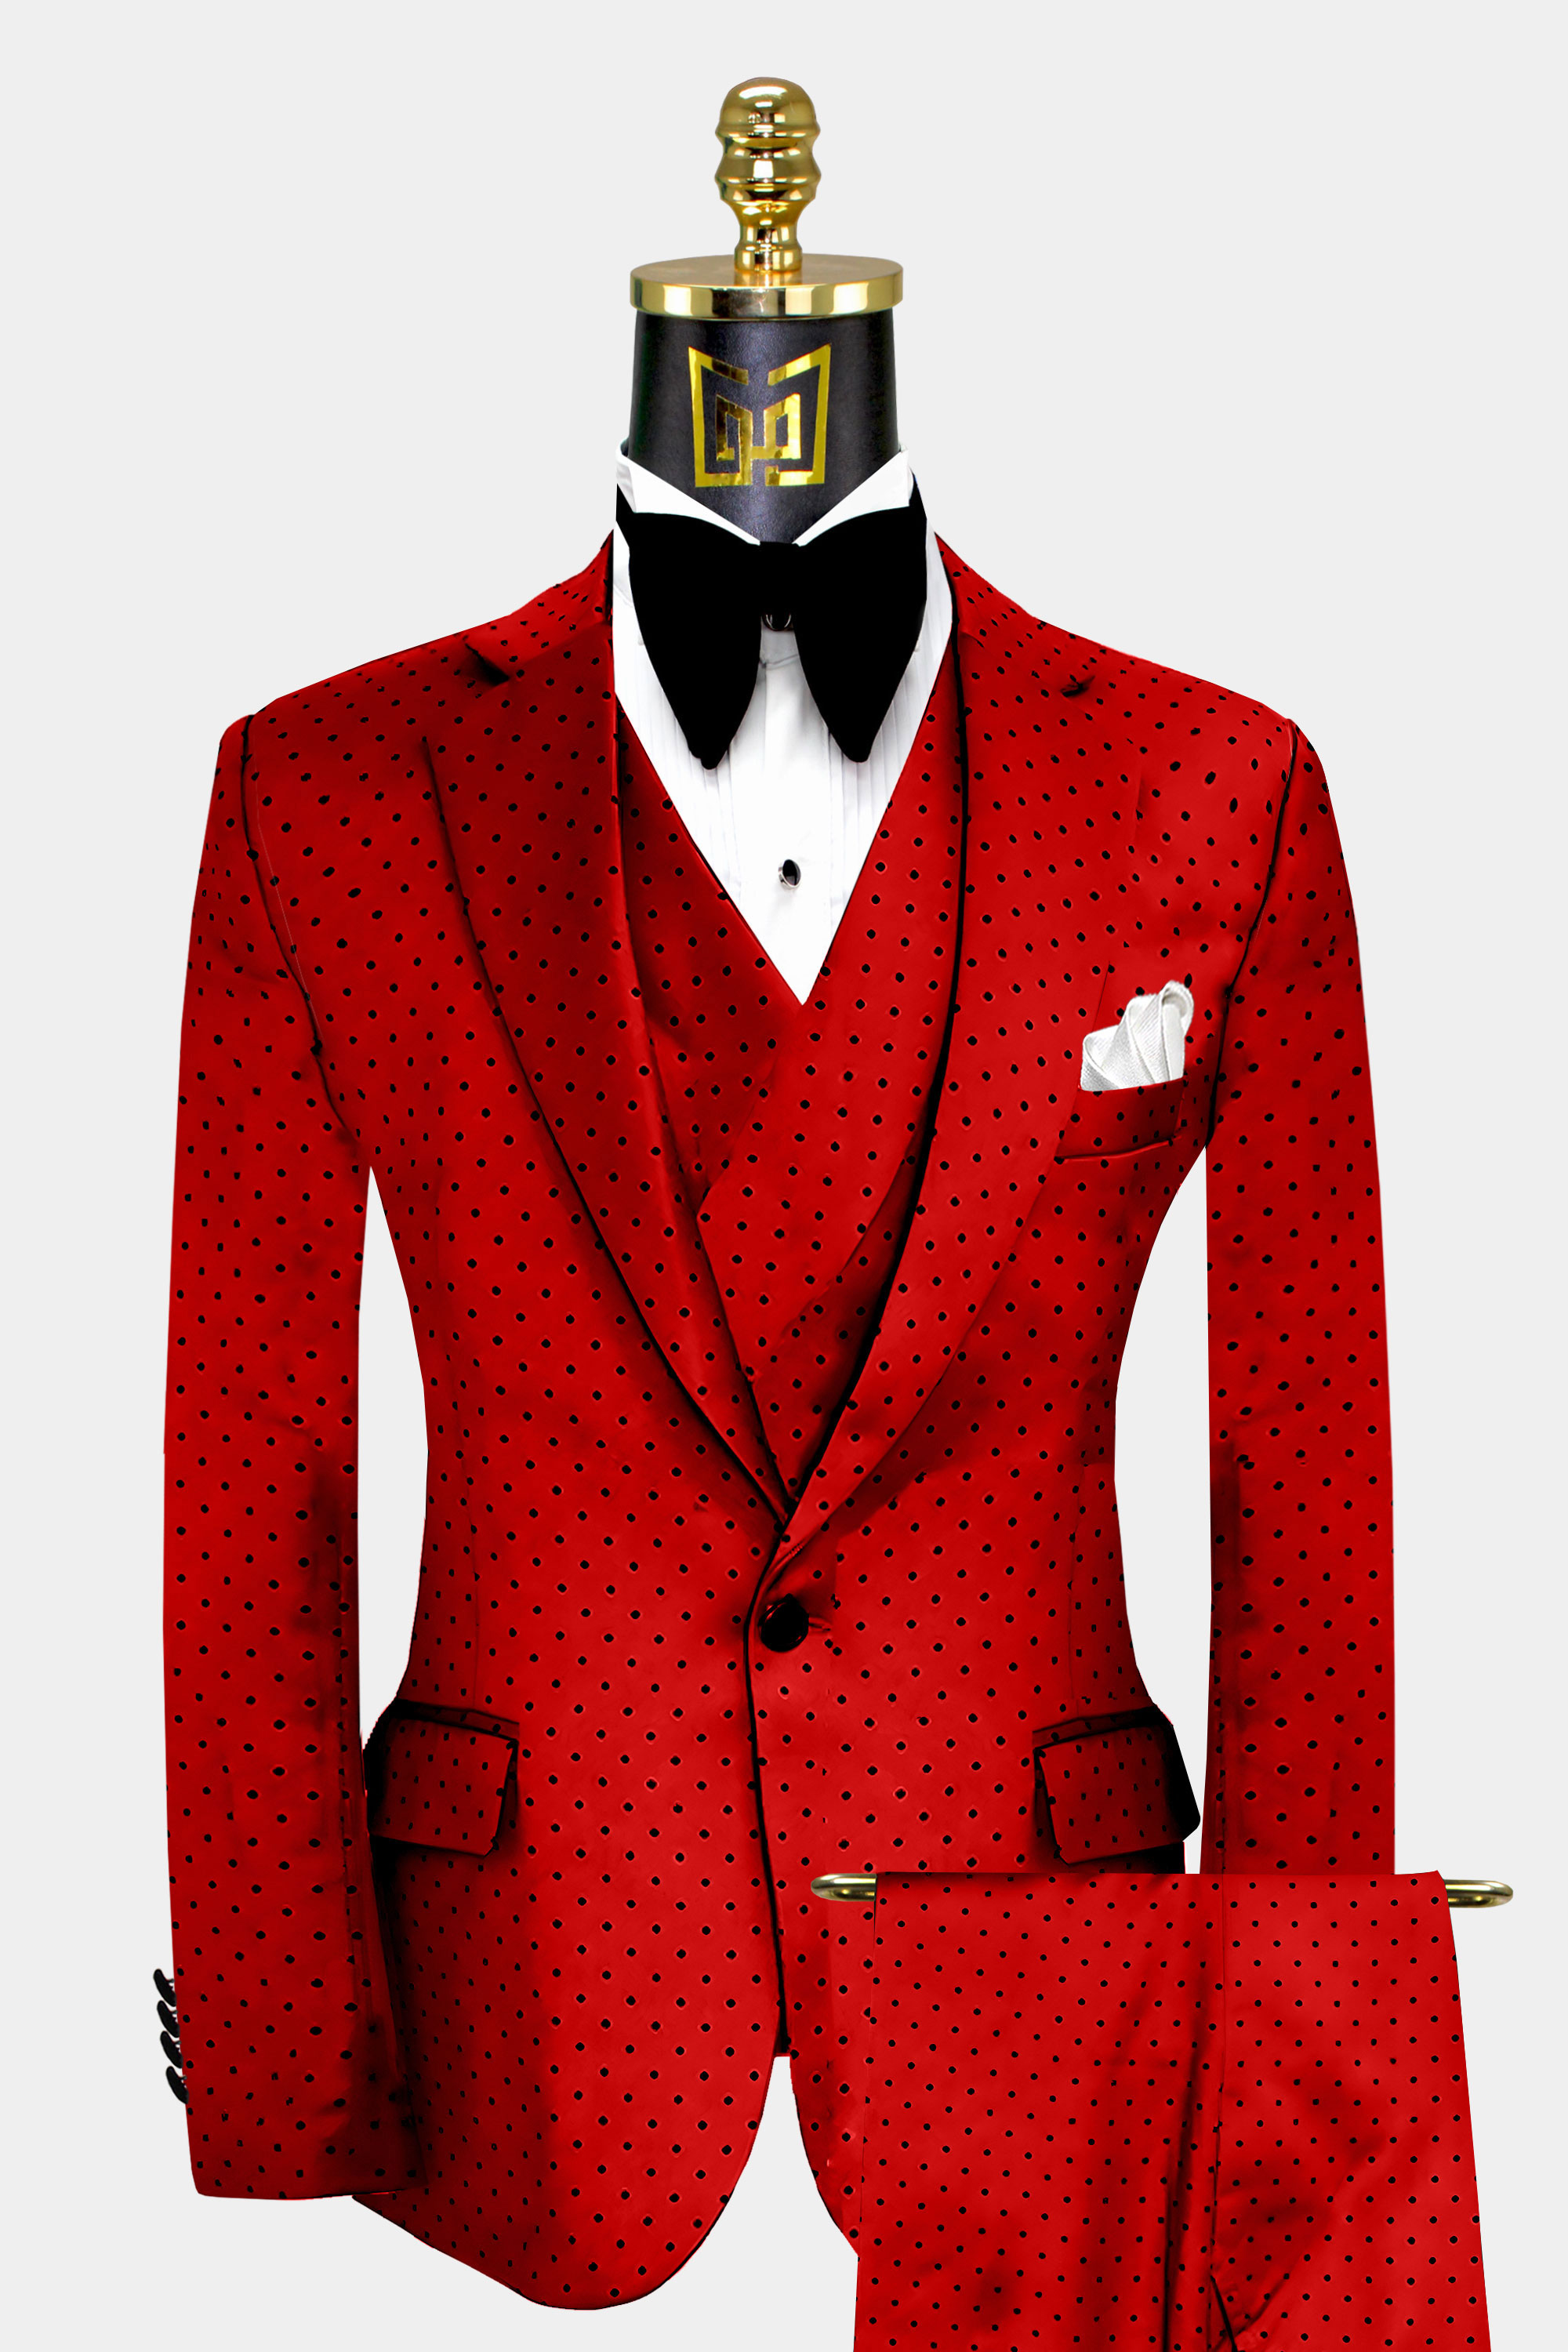 Red Polka Dot Suit - 3 Piece